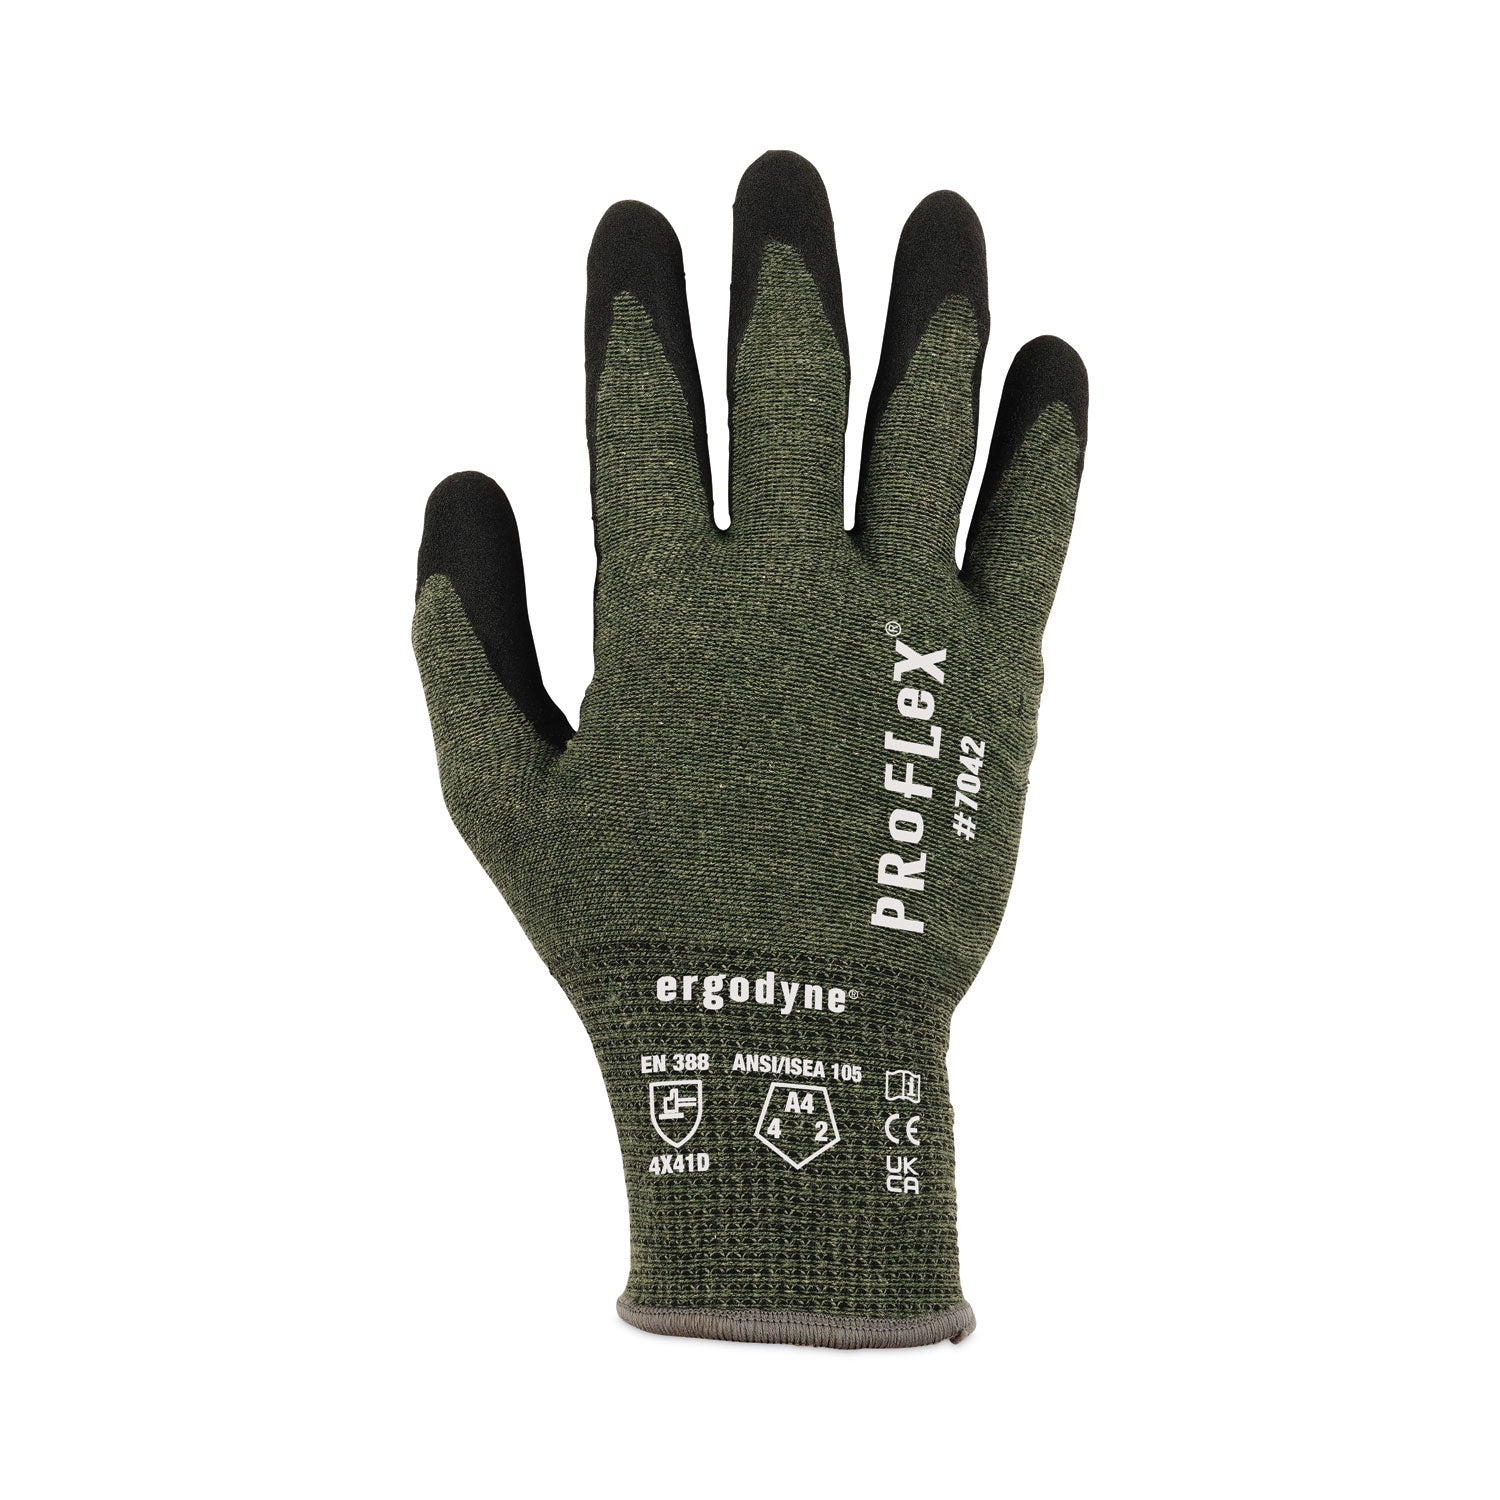 proflex-7042-ansi-a4-nitrile-coated-cr-gloves-green-large-12-pairs-pack-ships-in-1-3-business-days_ego10334 - 8